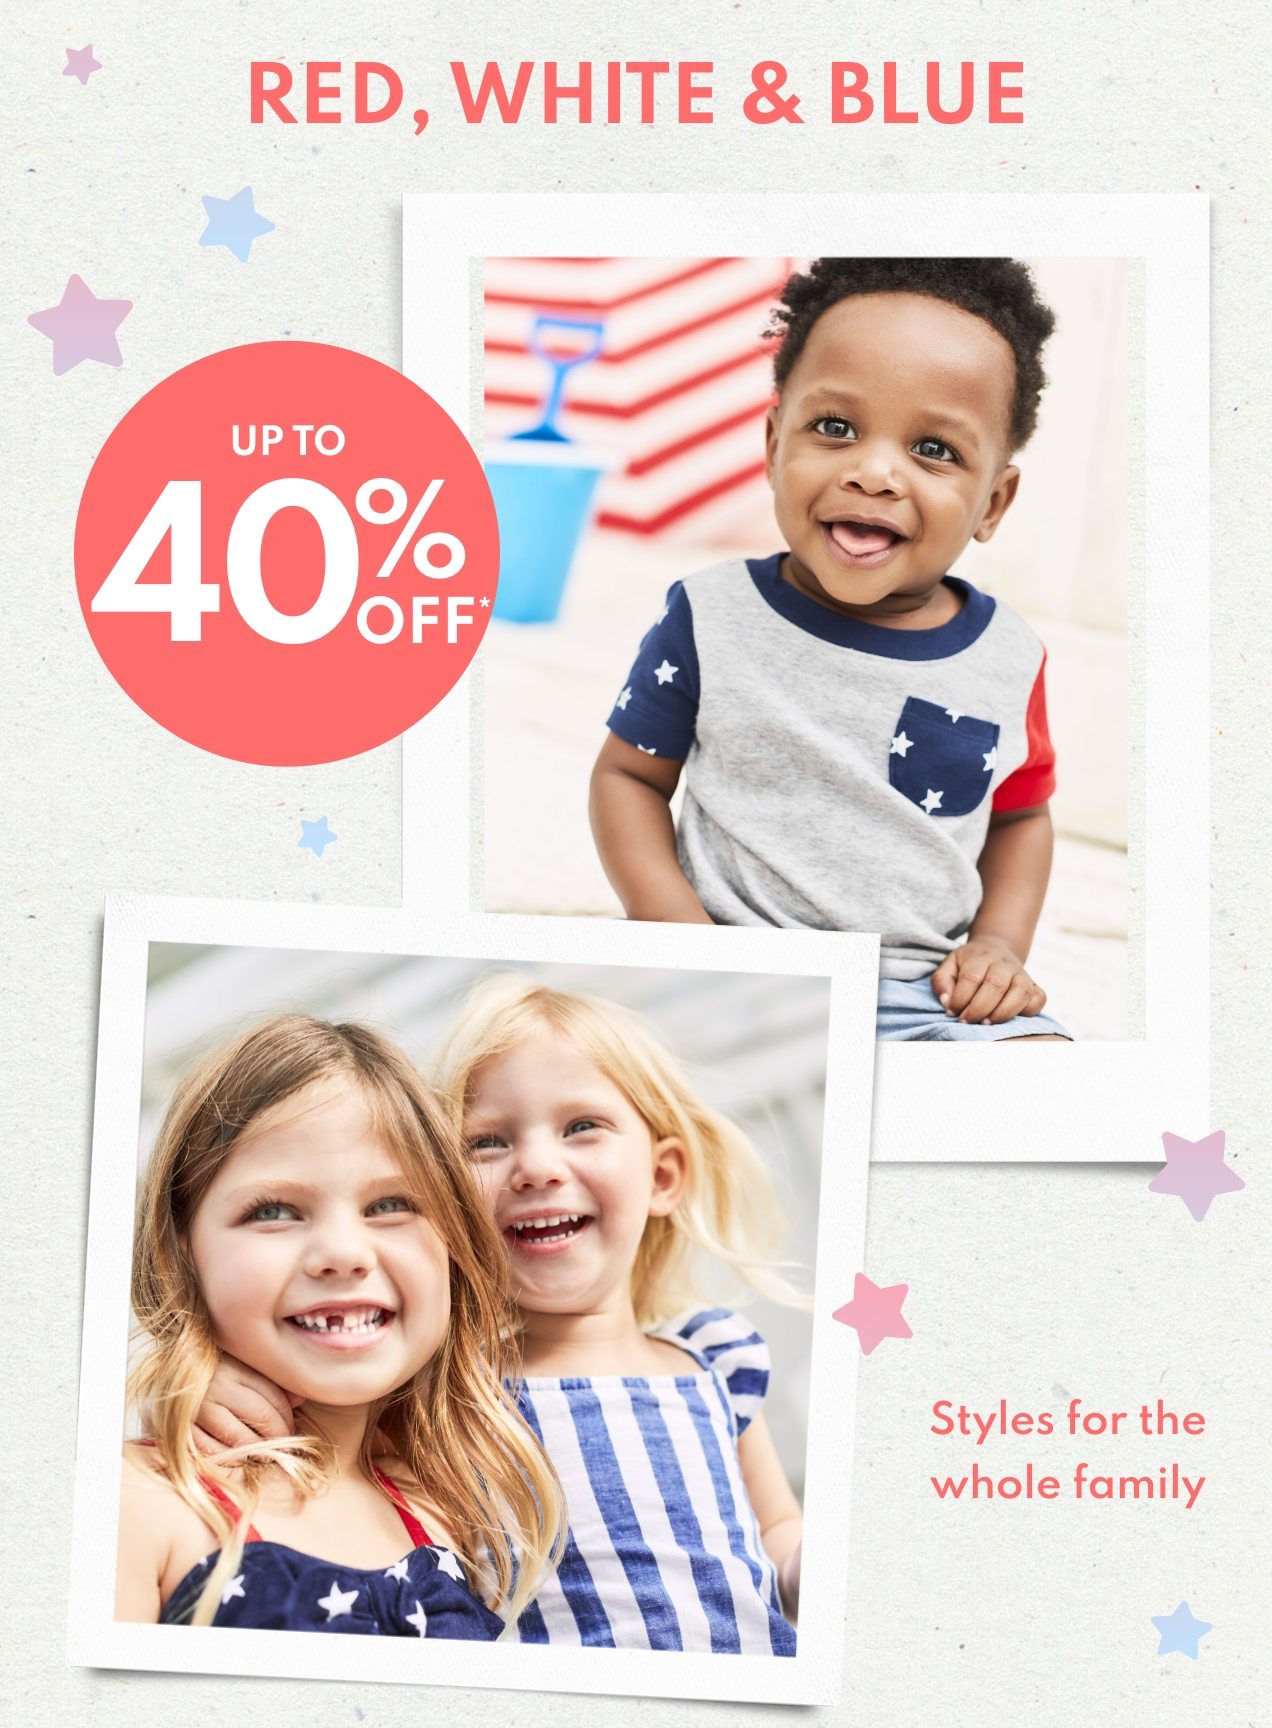 RED, WHITE & BLUE | UP TO 40% OFF* | Styles for the whole family 